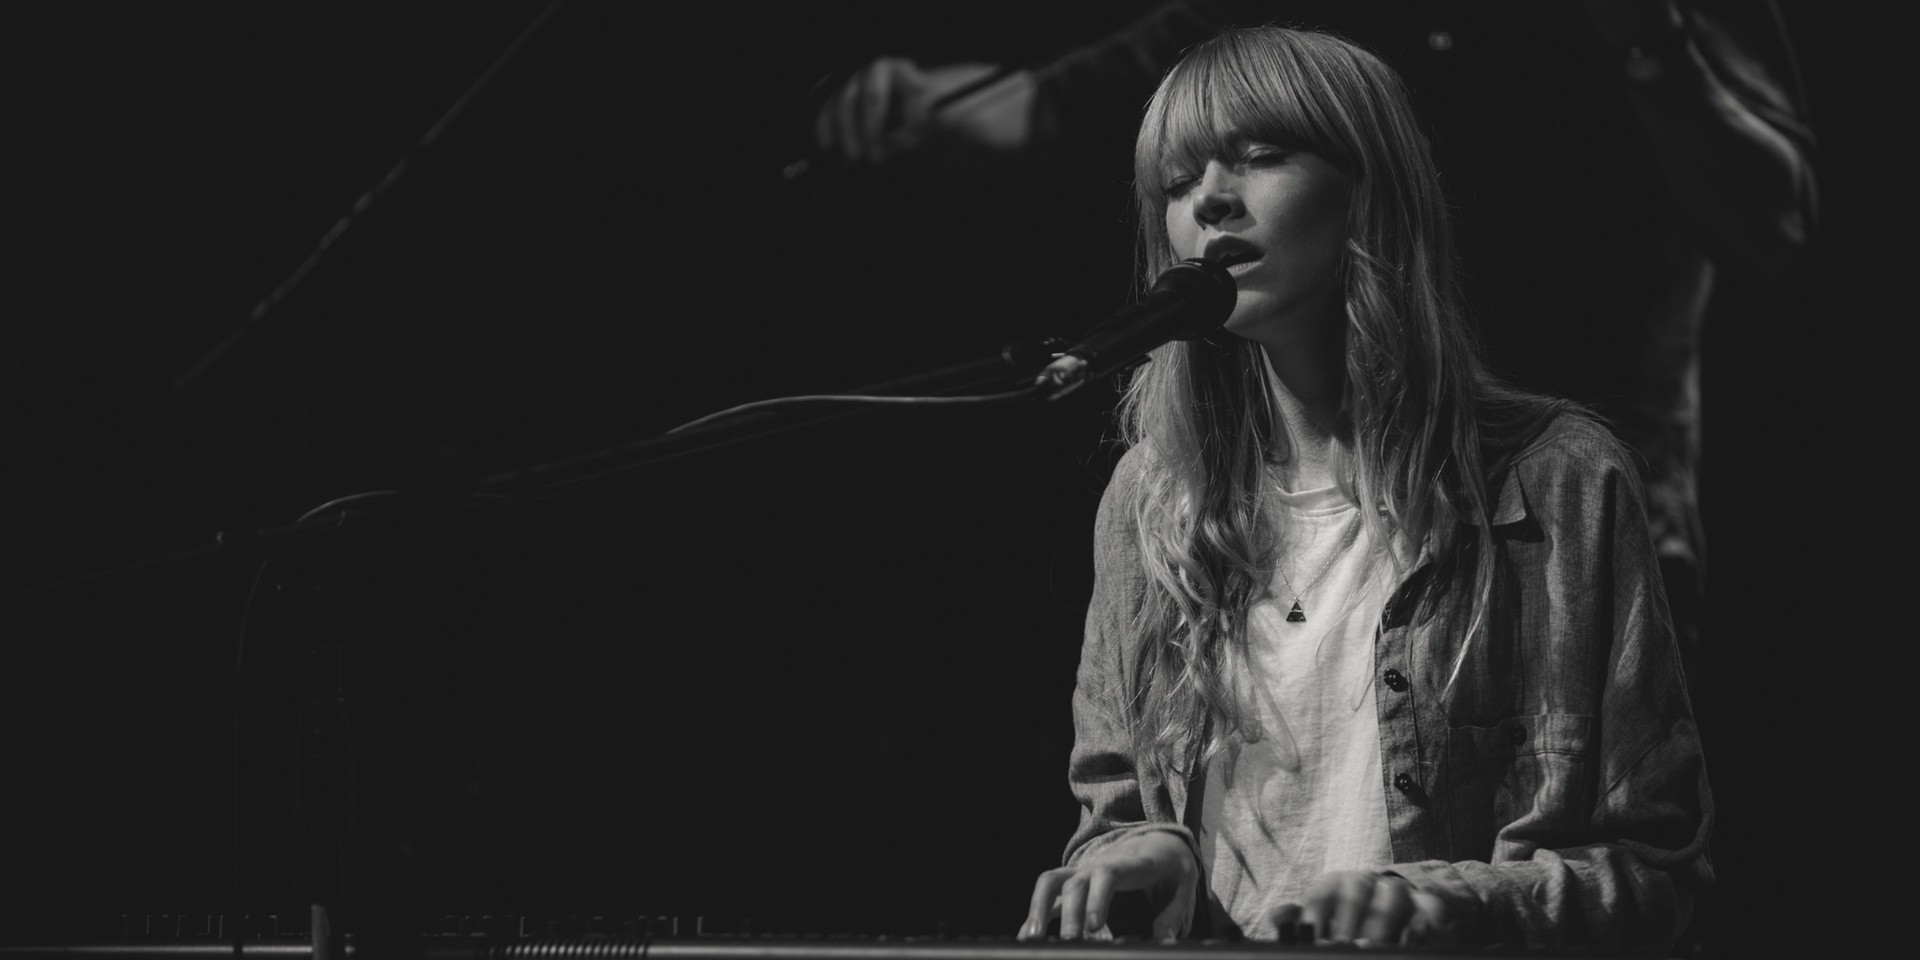 Lucy Rose takes on sexism with powerful new single 'Treat Me Like A Woman' – listen